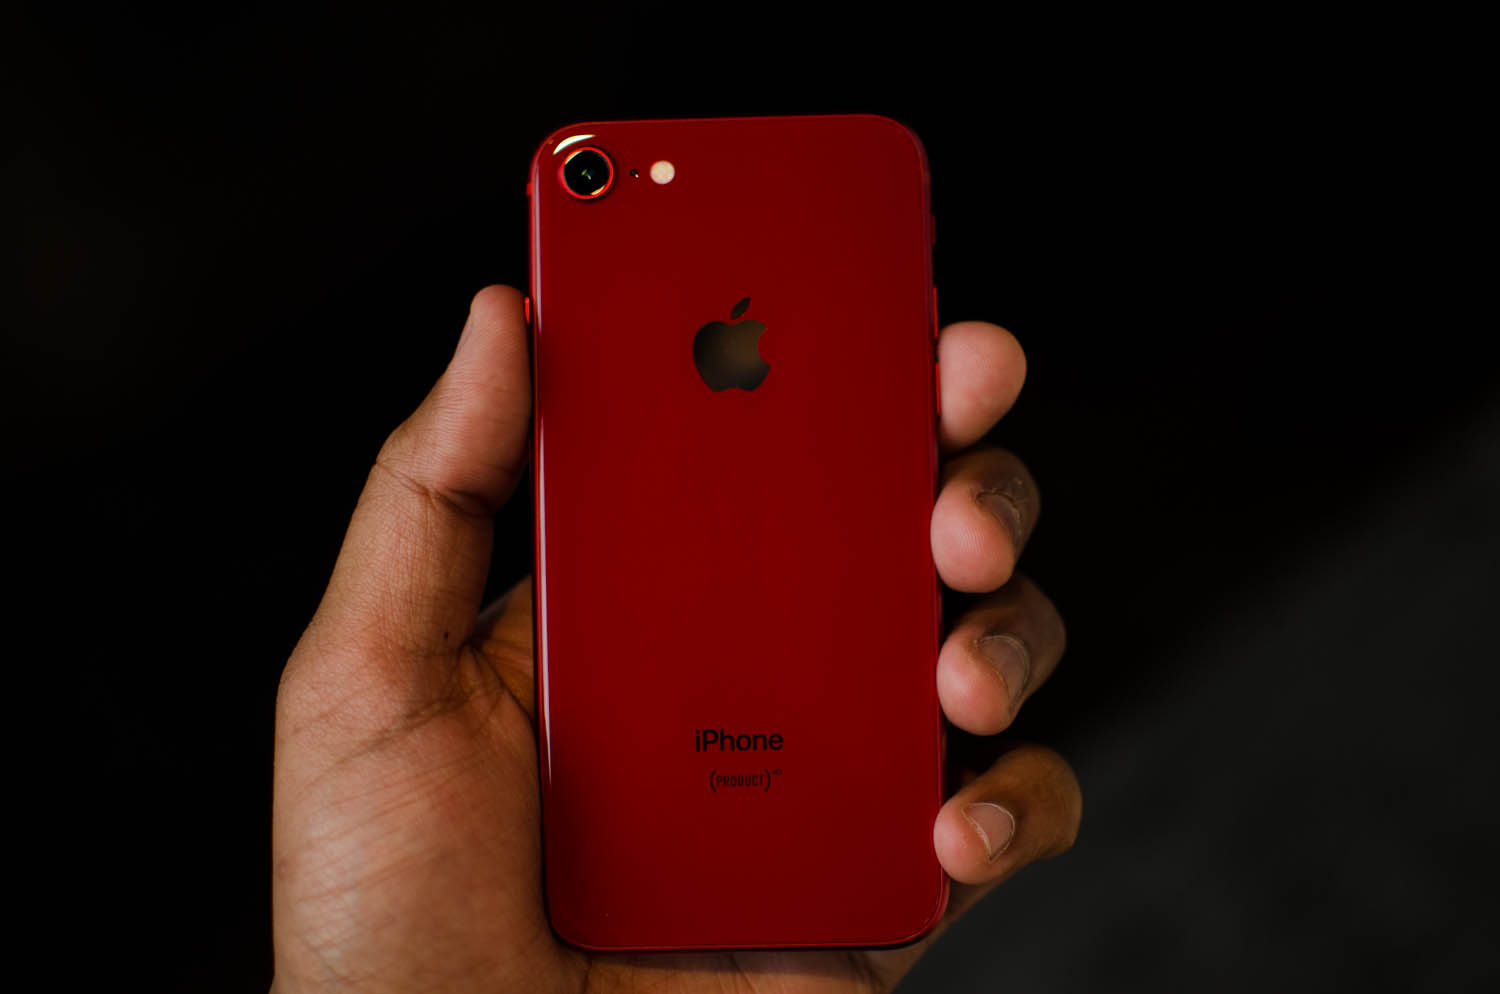 Phone 1 8 256. Iphone 8 Red. Apple iphone 8 Plus Red. Iphone 8 product Red. Apple iphone 8 красный.